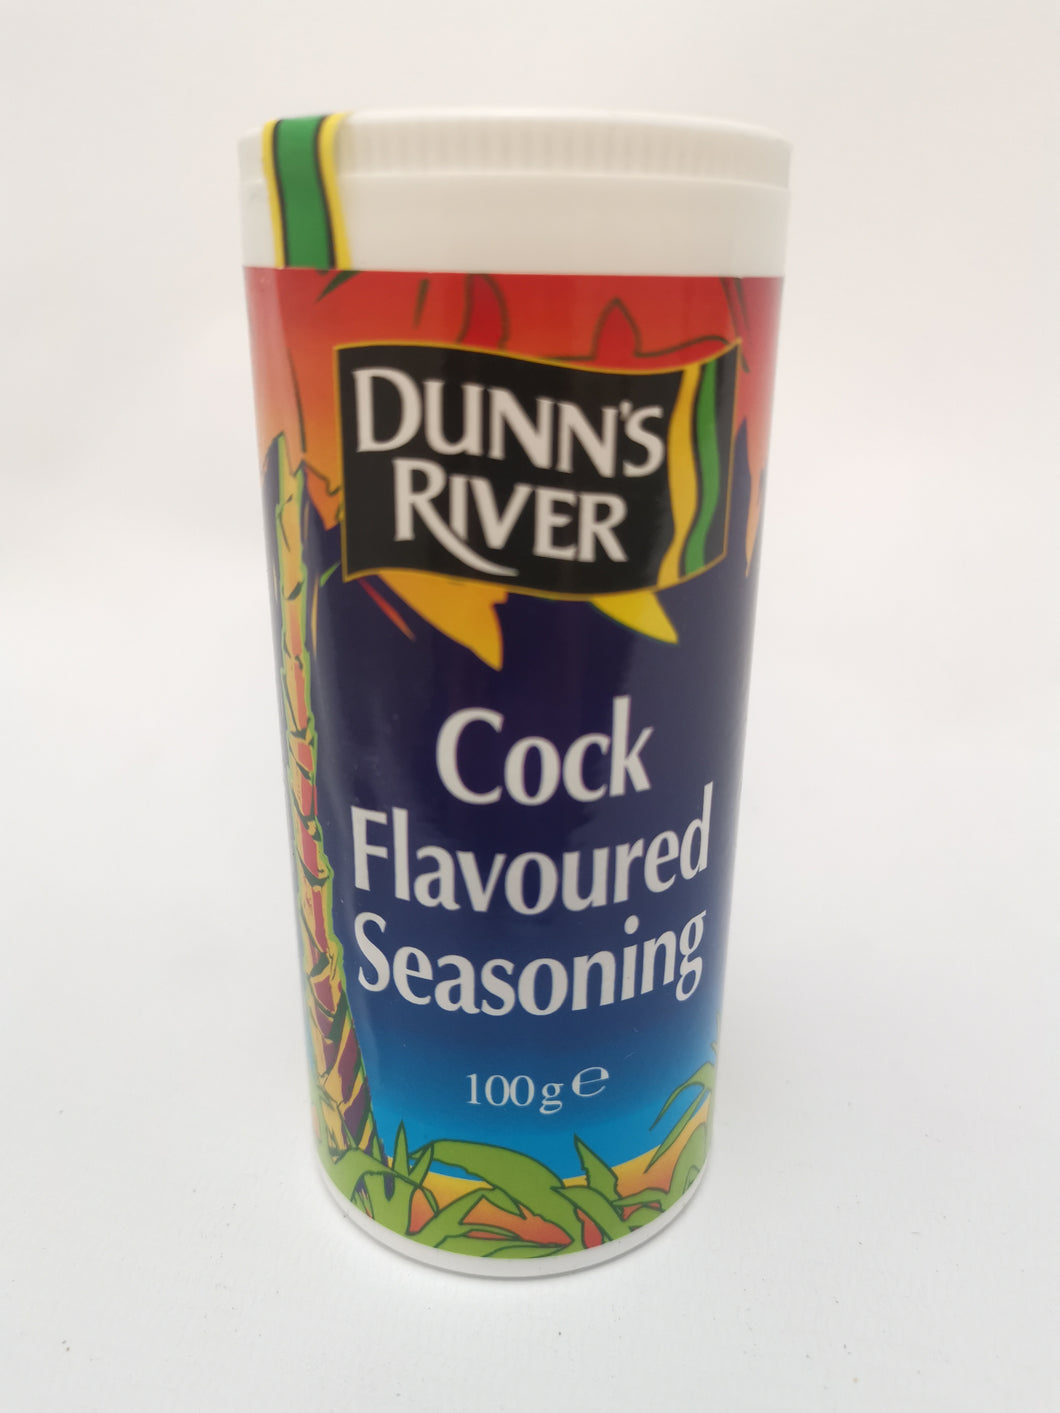 Dunn's River Cock Flavoured Seasoning 100g